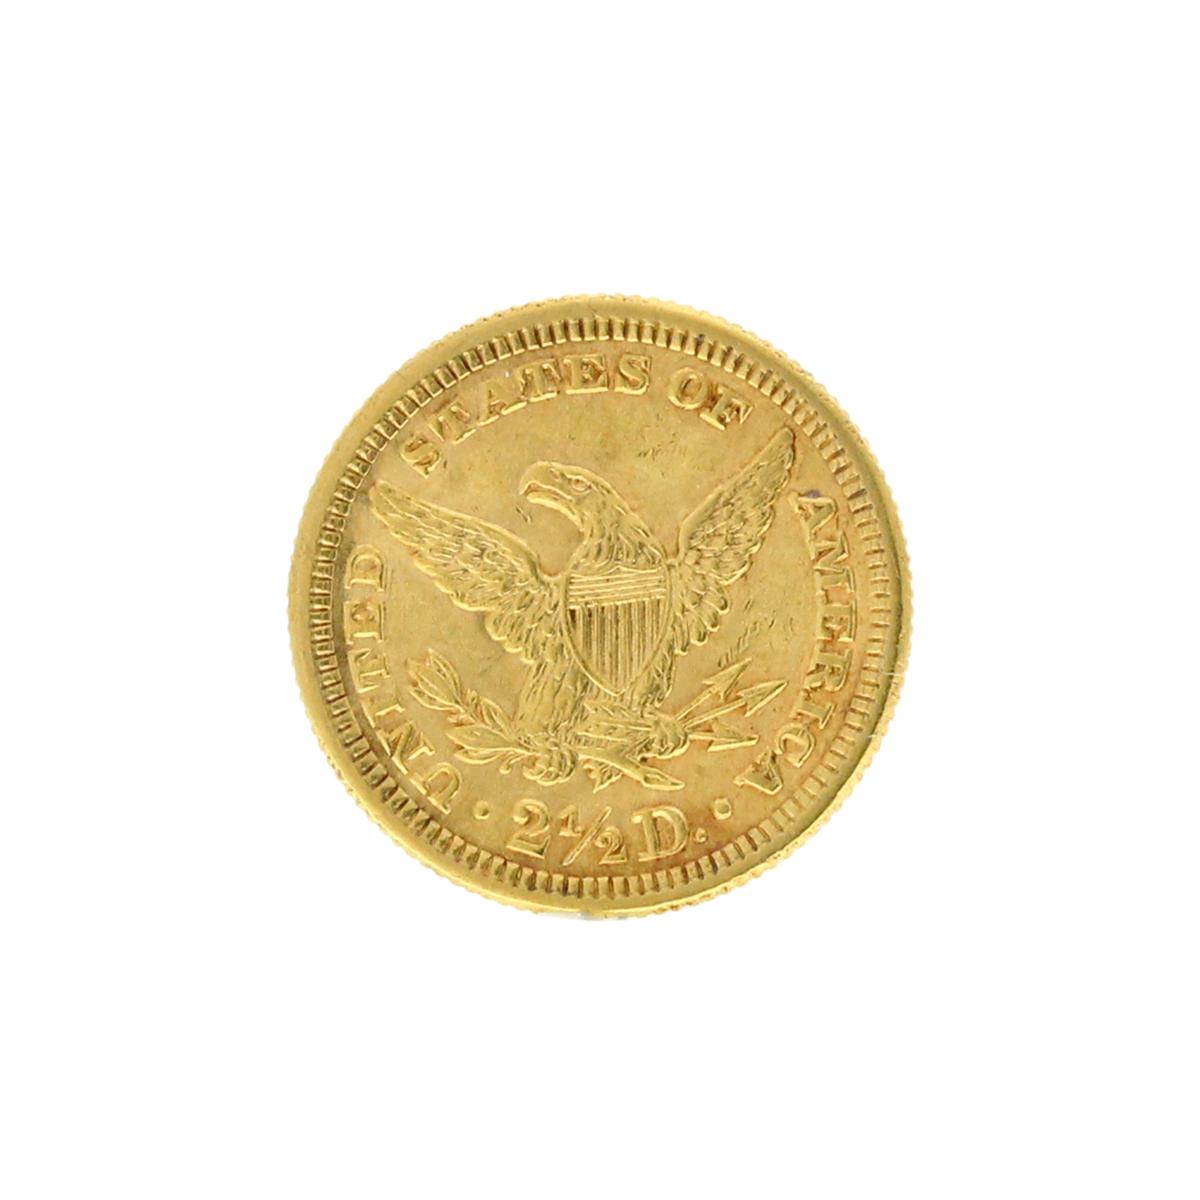 Rare 1907 $2.50 Liberty Head Gold Coin Great Investment